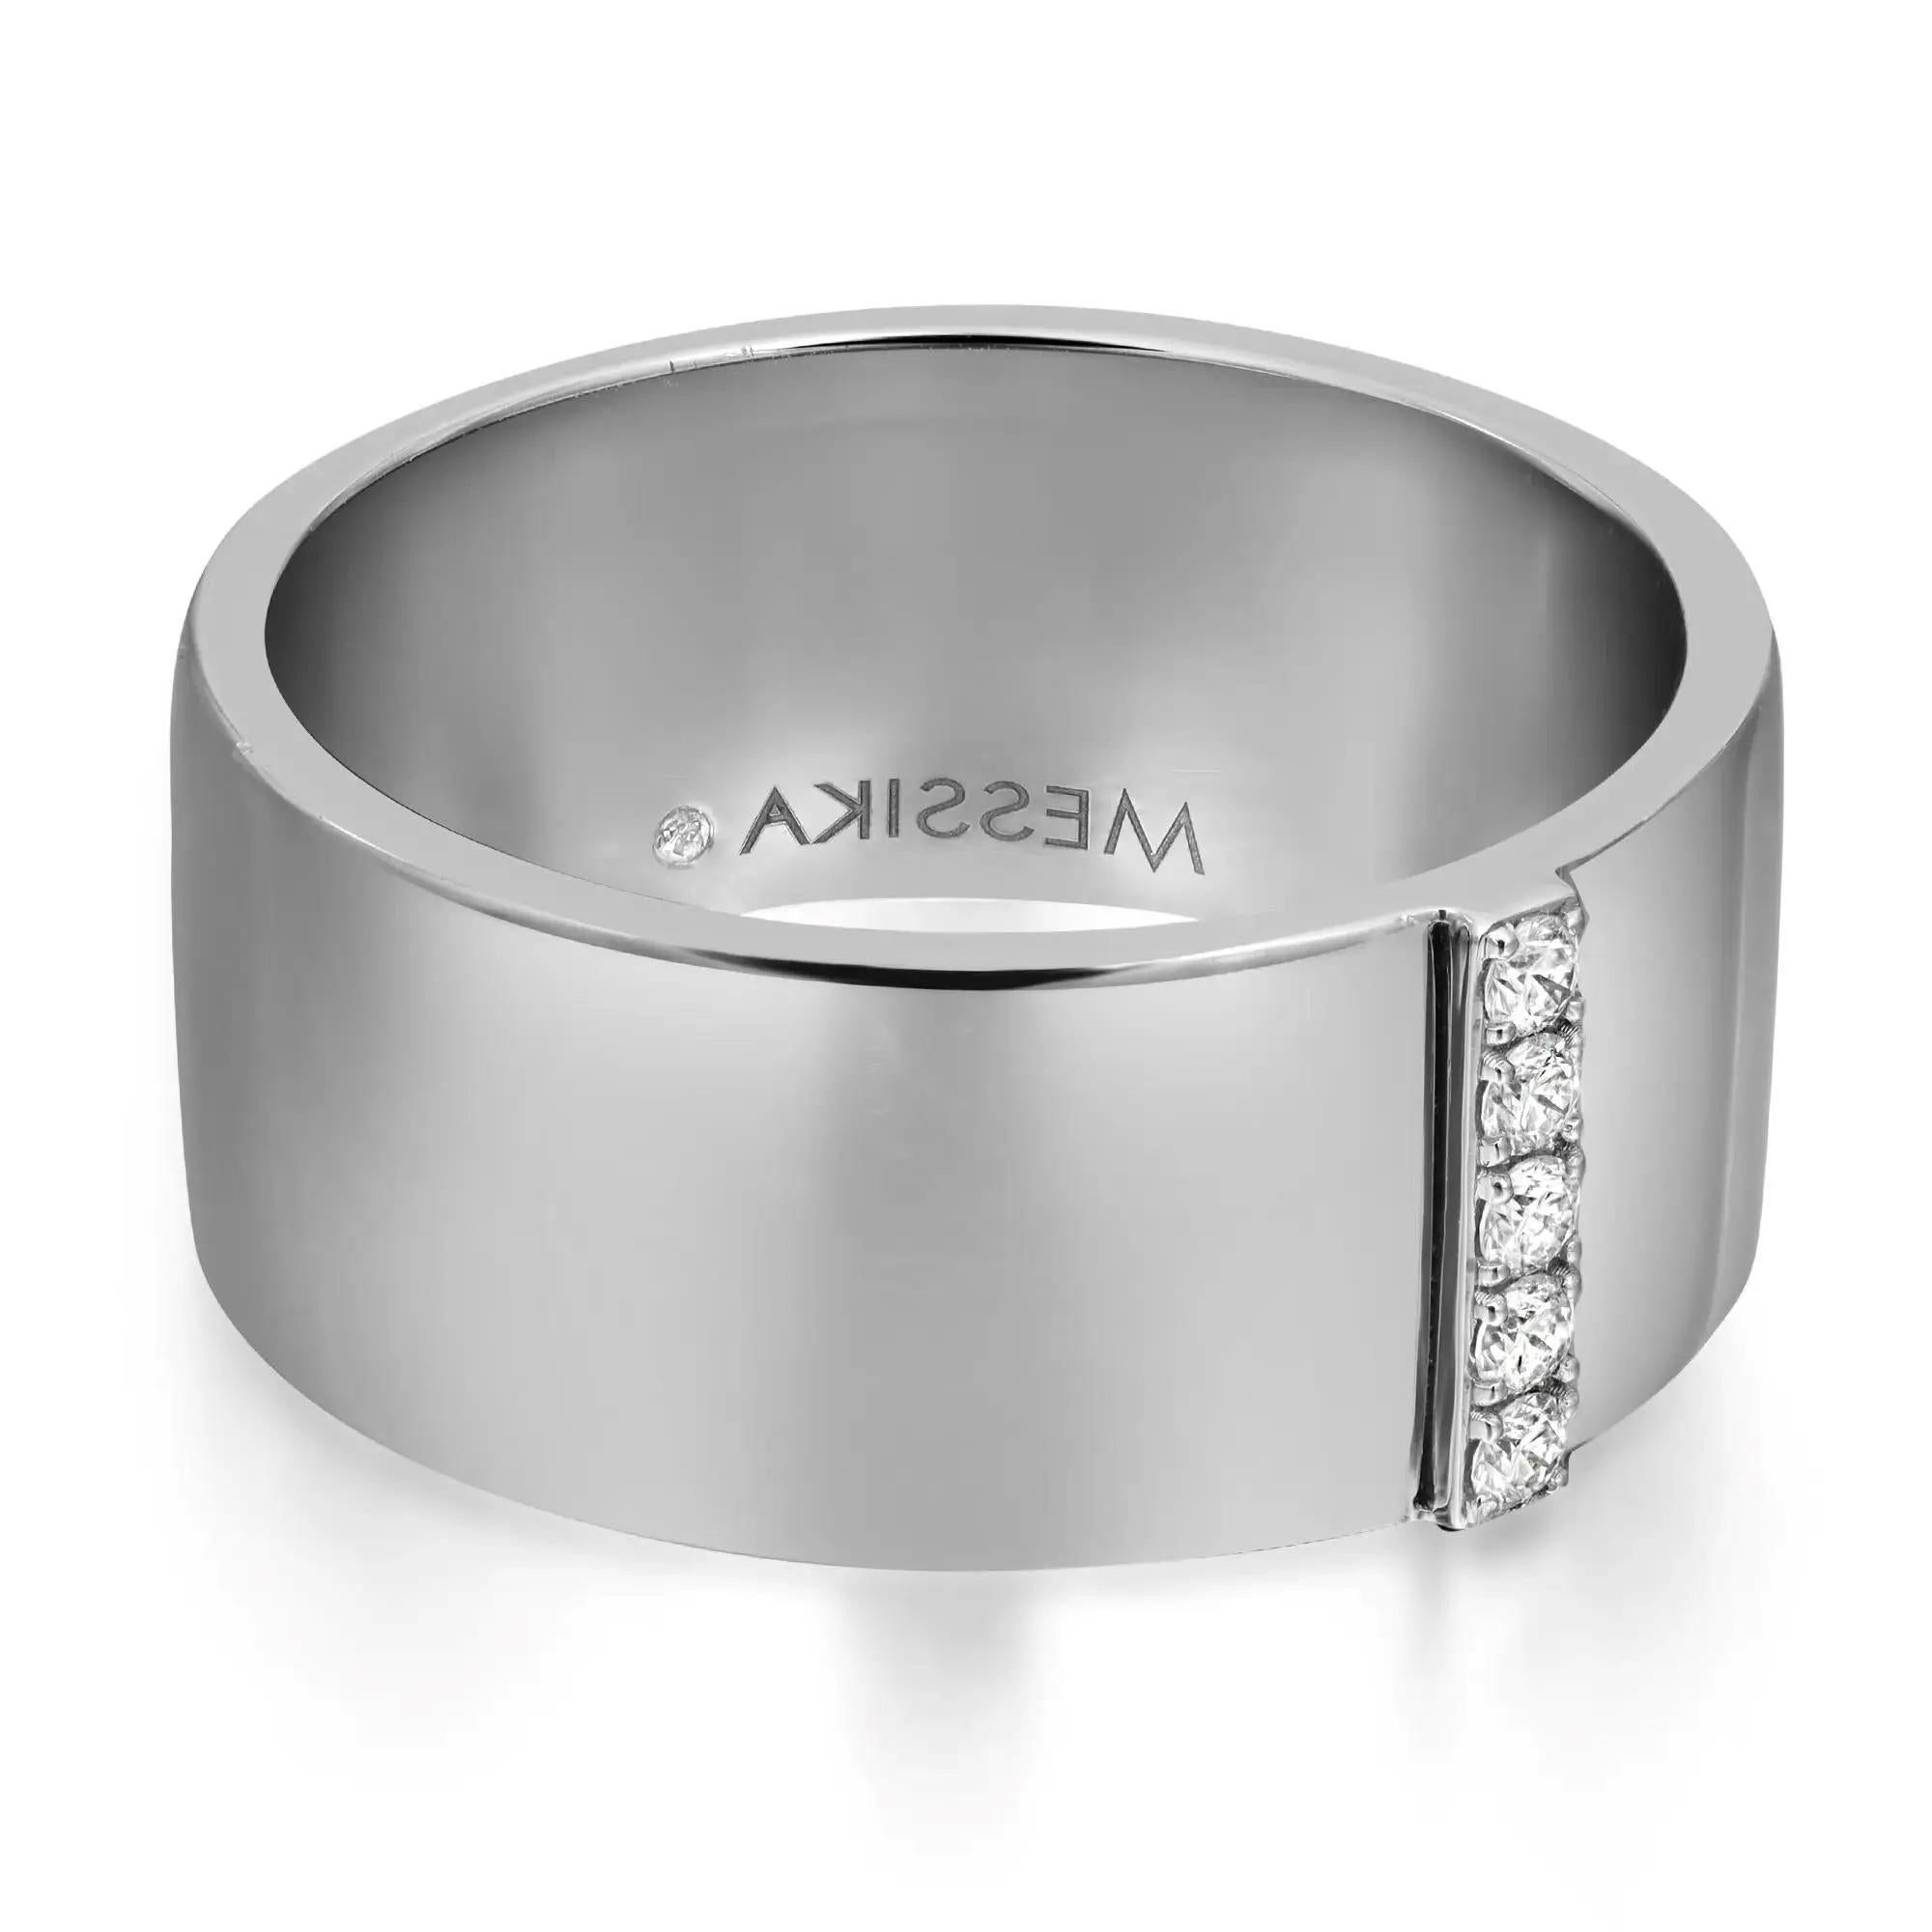 Modern and chic Messika Kate diamond wide band ring crafted in 18K white gold. This ring is accented with a single row of 5 pave set round brilliant cut diamonds in the center. Total diamond weight: 0.07 carats. Diamond quality: color G and clarity